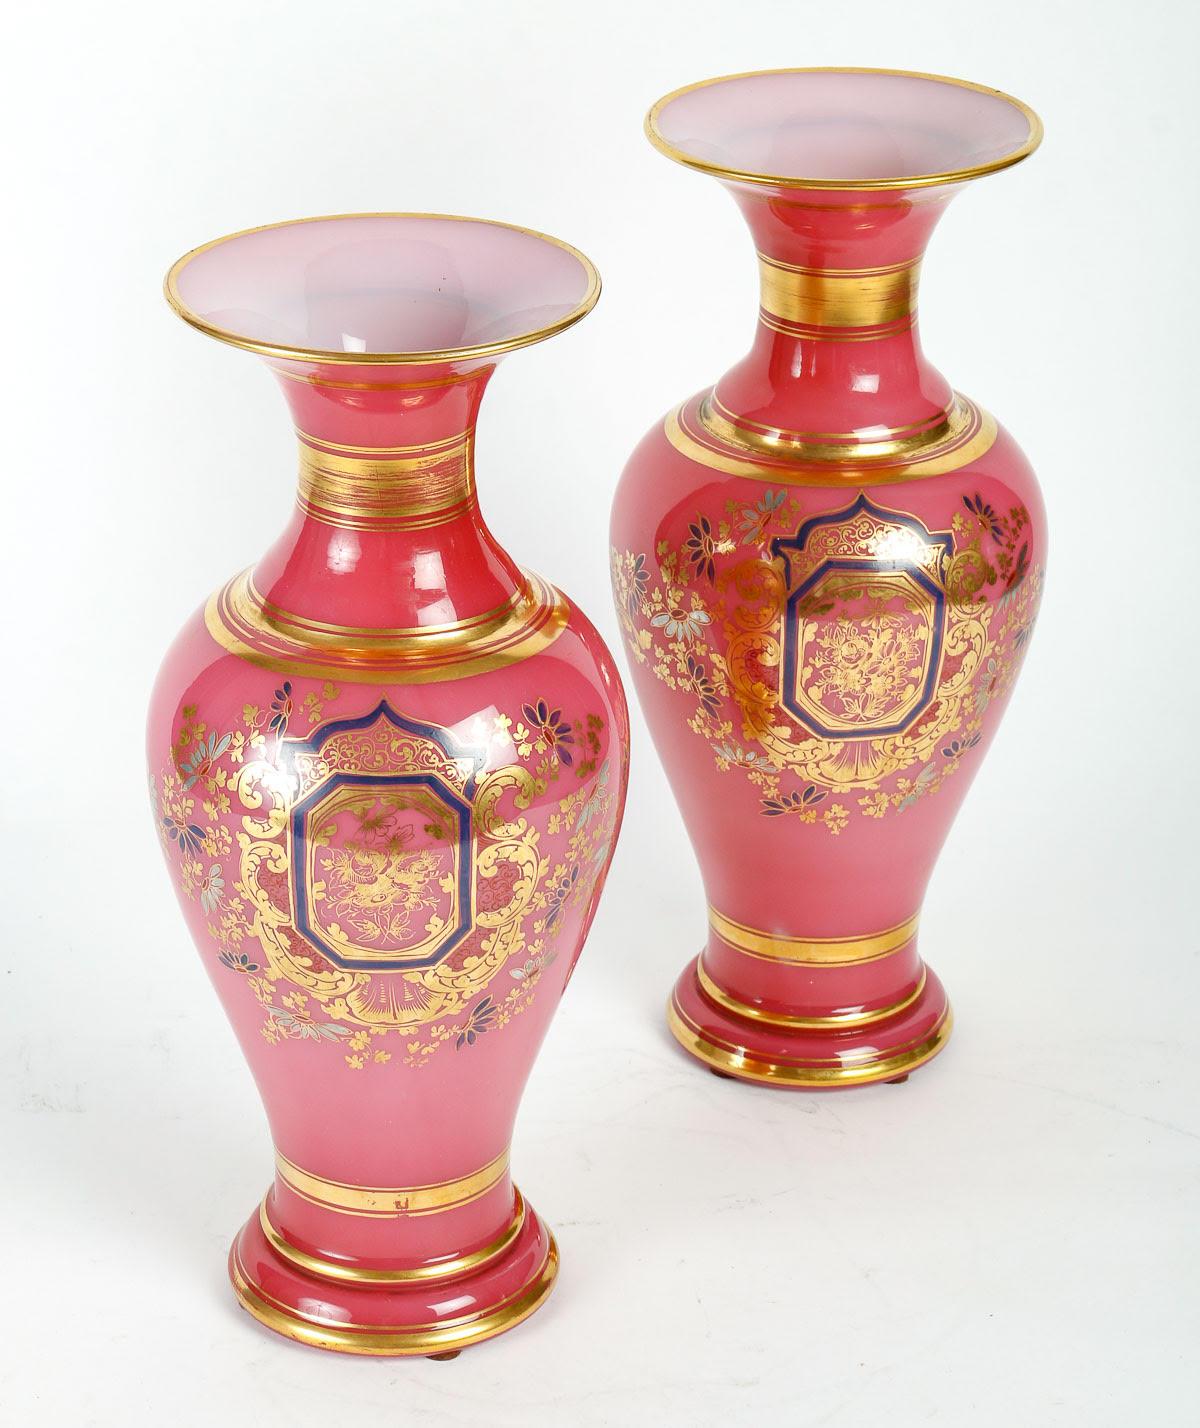 Pair of Baccarat pink opaline vases, Napoleon III period.

A pair of Baccarat pink opaline vases with gold highlights, 19th century, Napoleon III period.

H: 35cm, D: 16cm